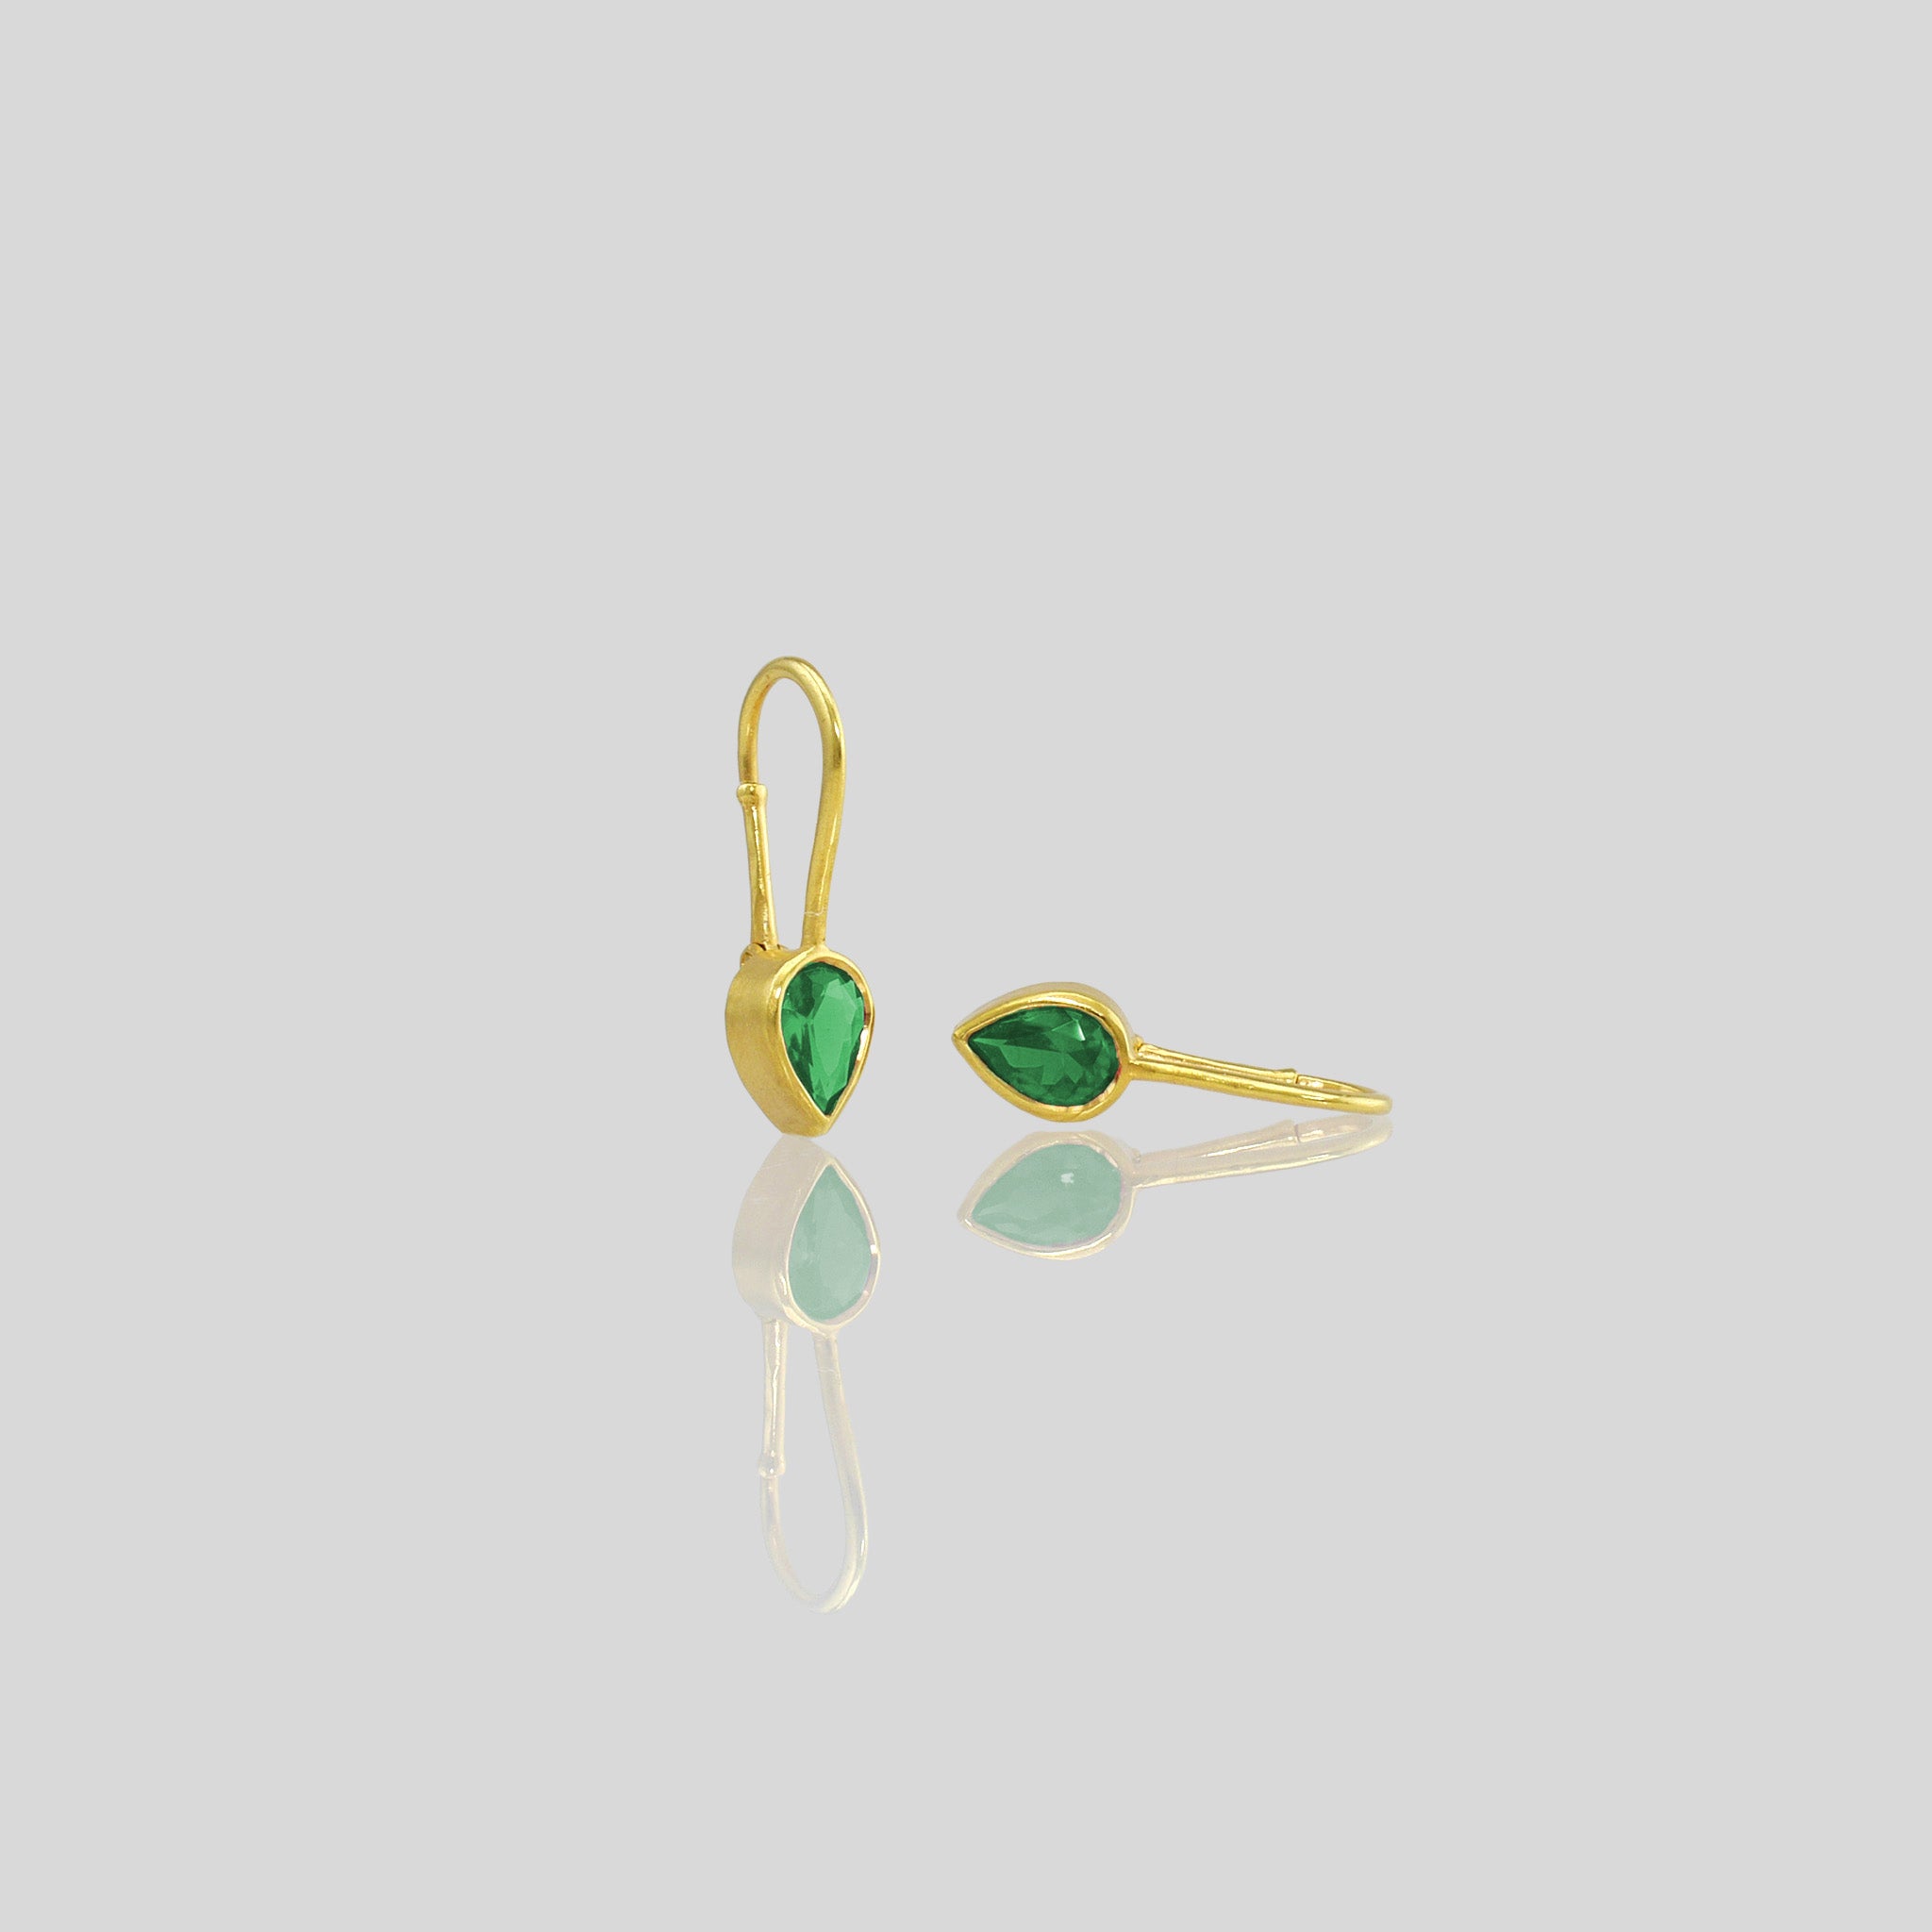 Lightweight 18k gold earrings featuring a drop-shaped Emerald gemstone and promote spiritual harmony